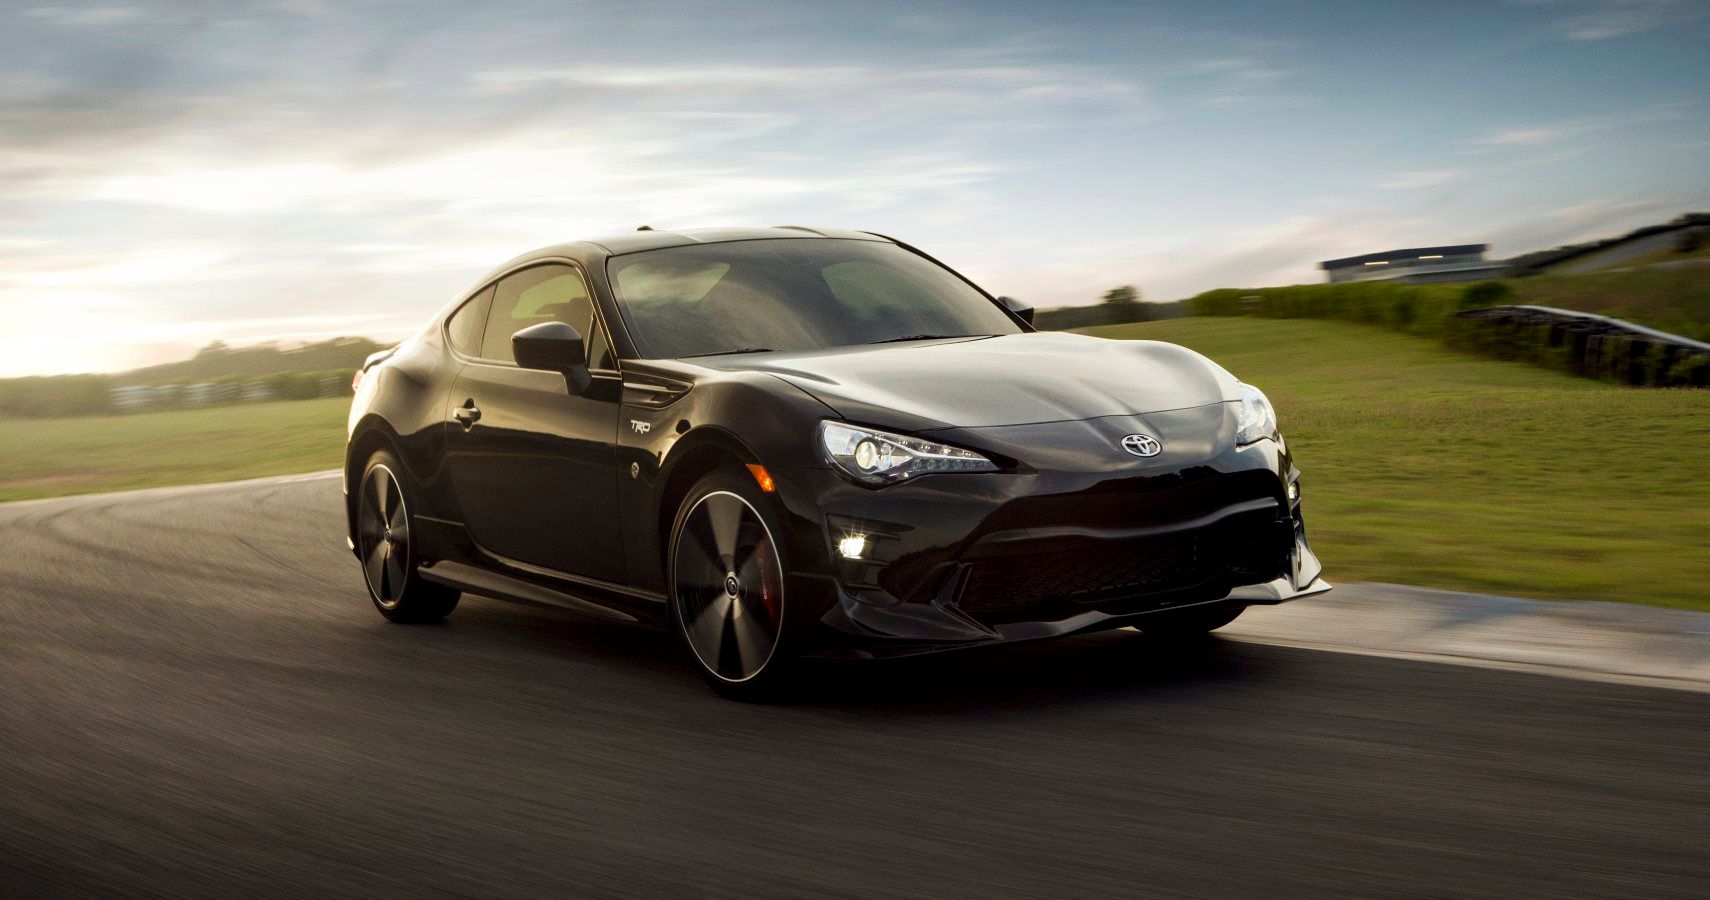 Next Generation Of Toyota 86 Might Move To New Platform